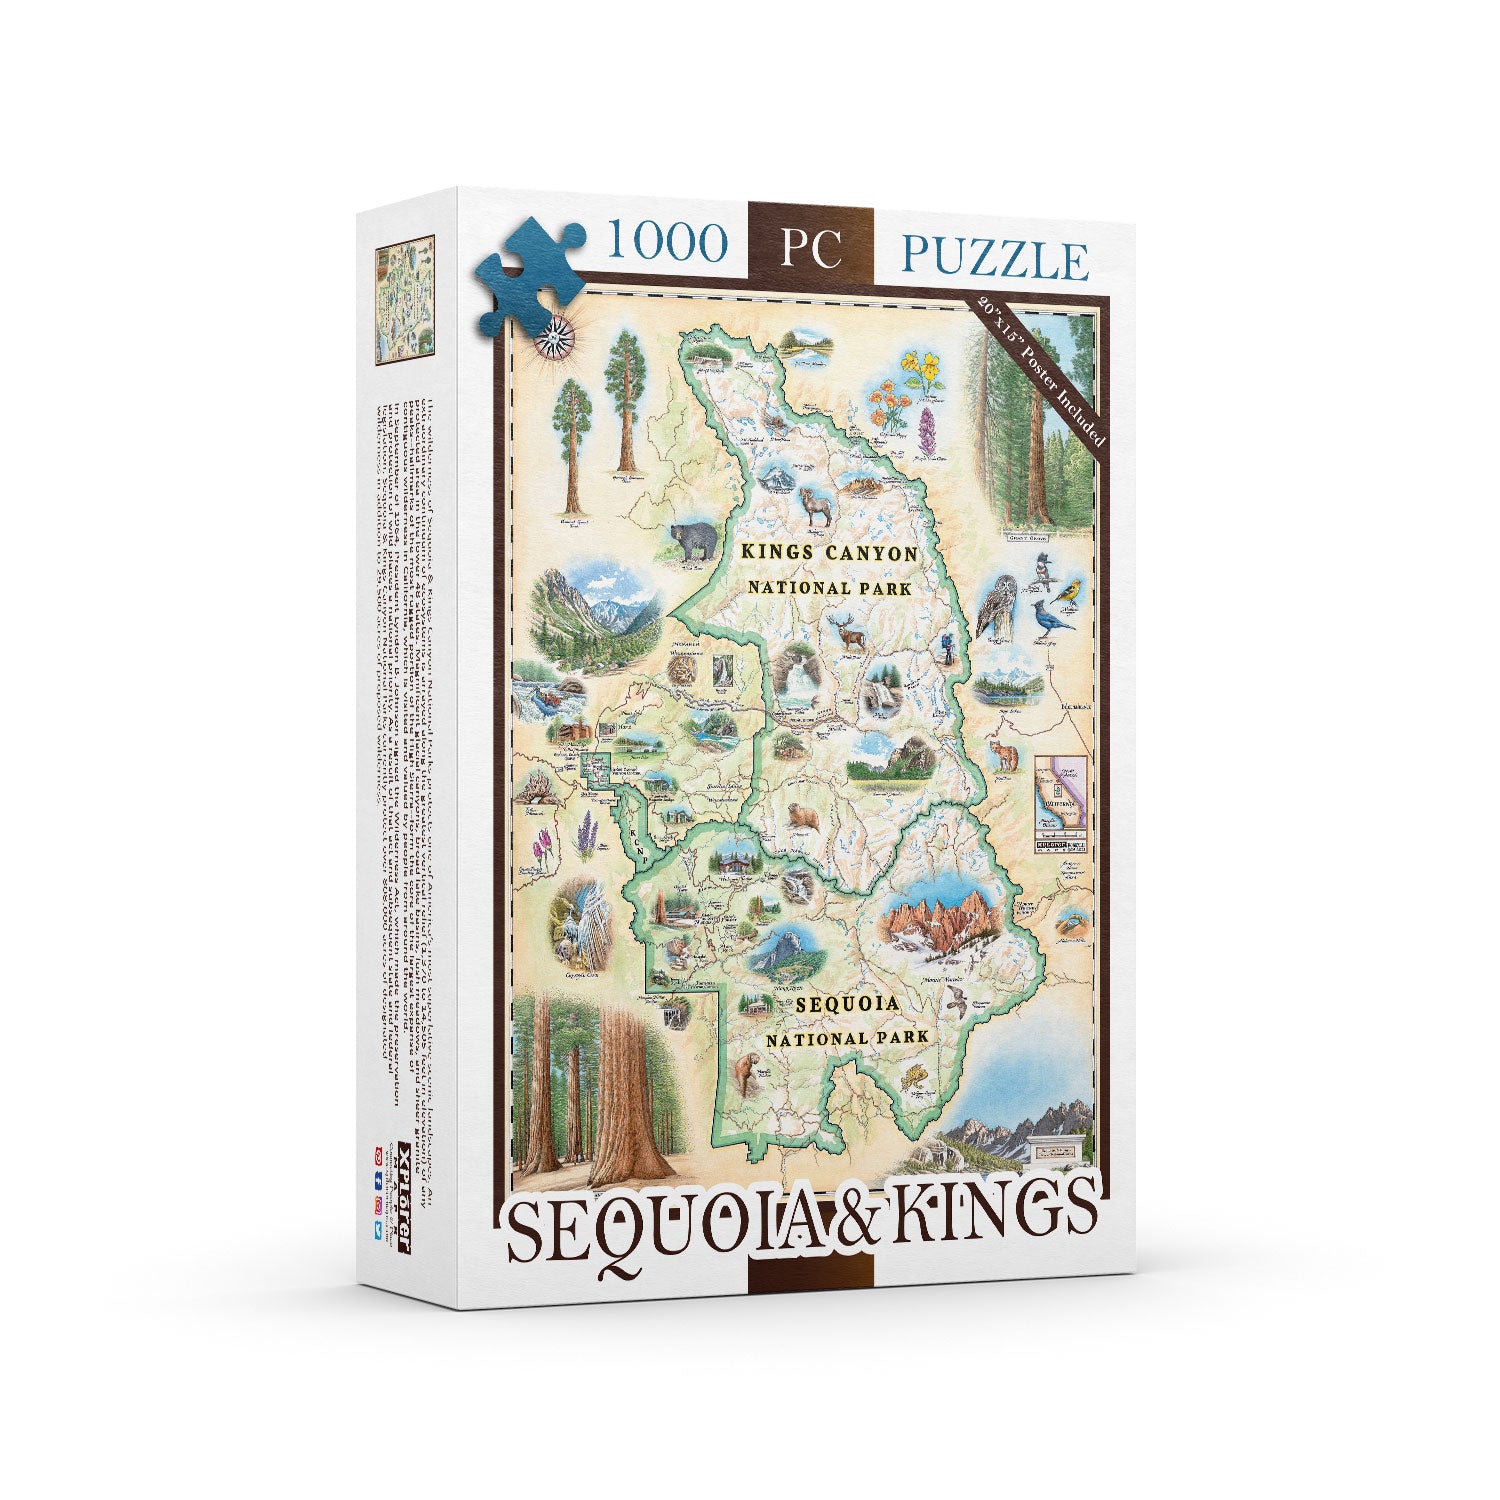 Sequoia & Kings Canyon National Park Map Jigsaw Puzzle by Xplorer Maps. Features illustrations of the Giant Forest, Mount Whitney, and the John Muir Lodge. Flora and fauna include mule deer, red fox, Sierra Purple shooting star flowers, and California poppy.